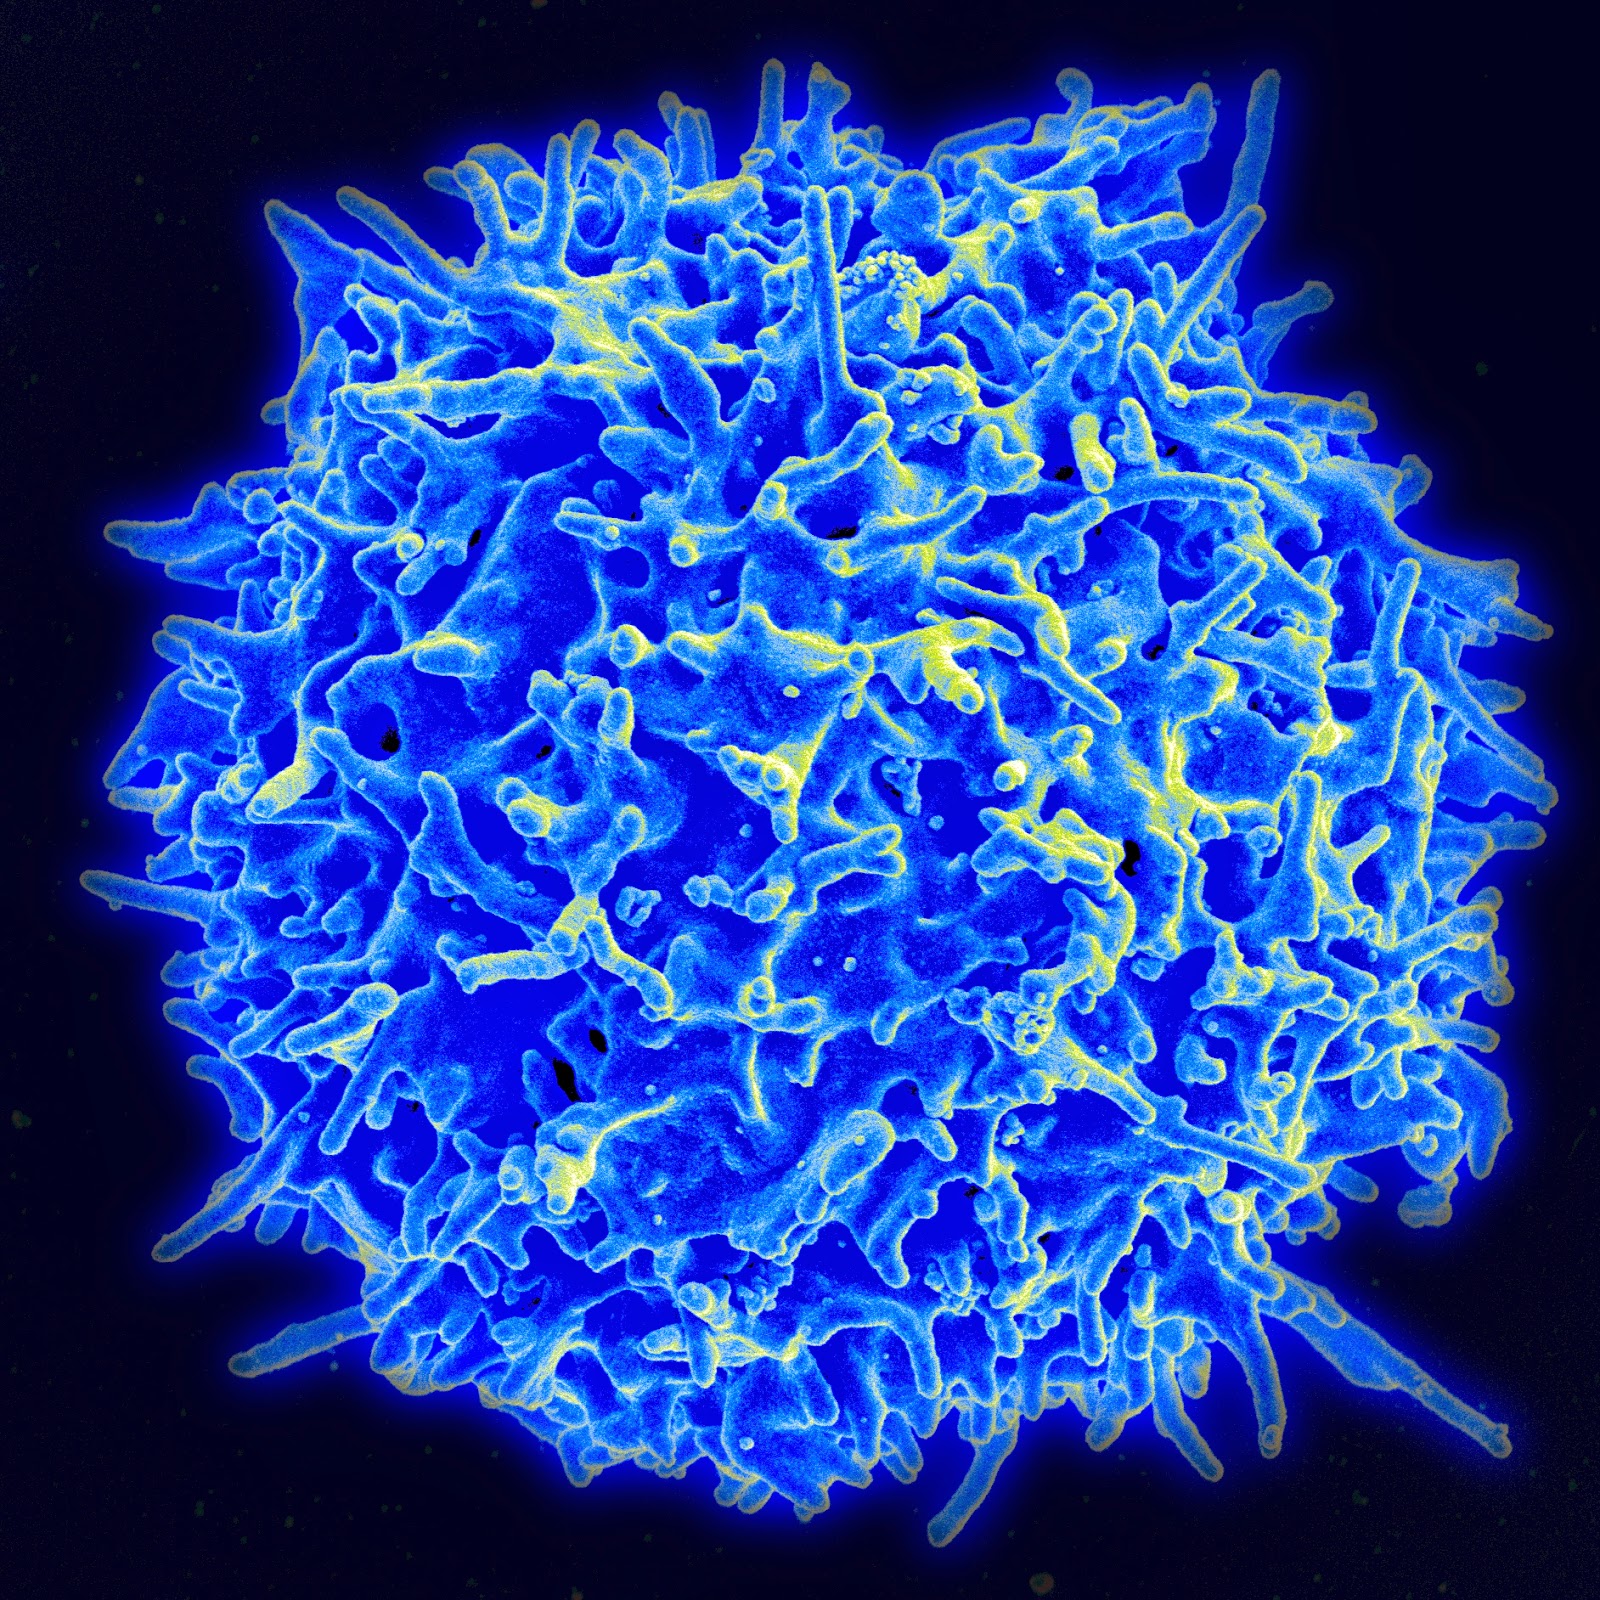 T cells are white blood cells whose receptors are focused not on adhesion, but on activities like identifying various peptides. Credit: NIAID/NIH.